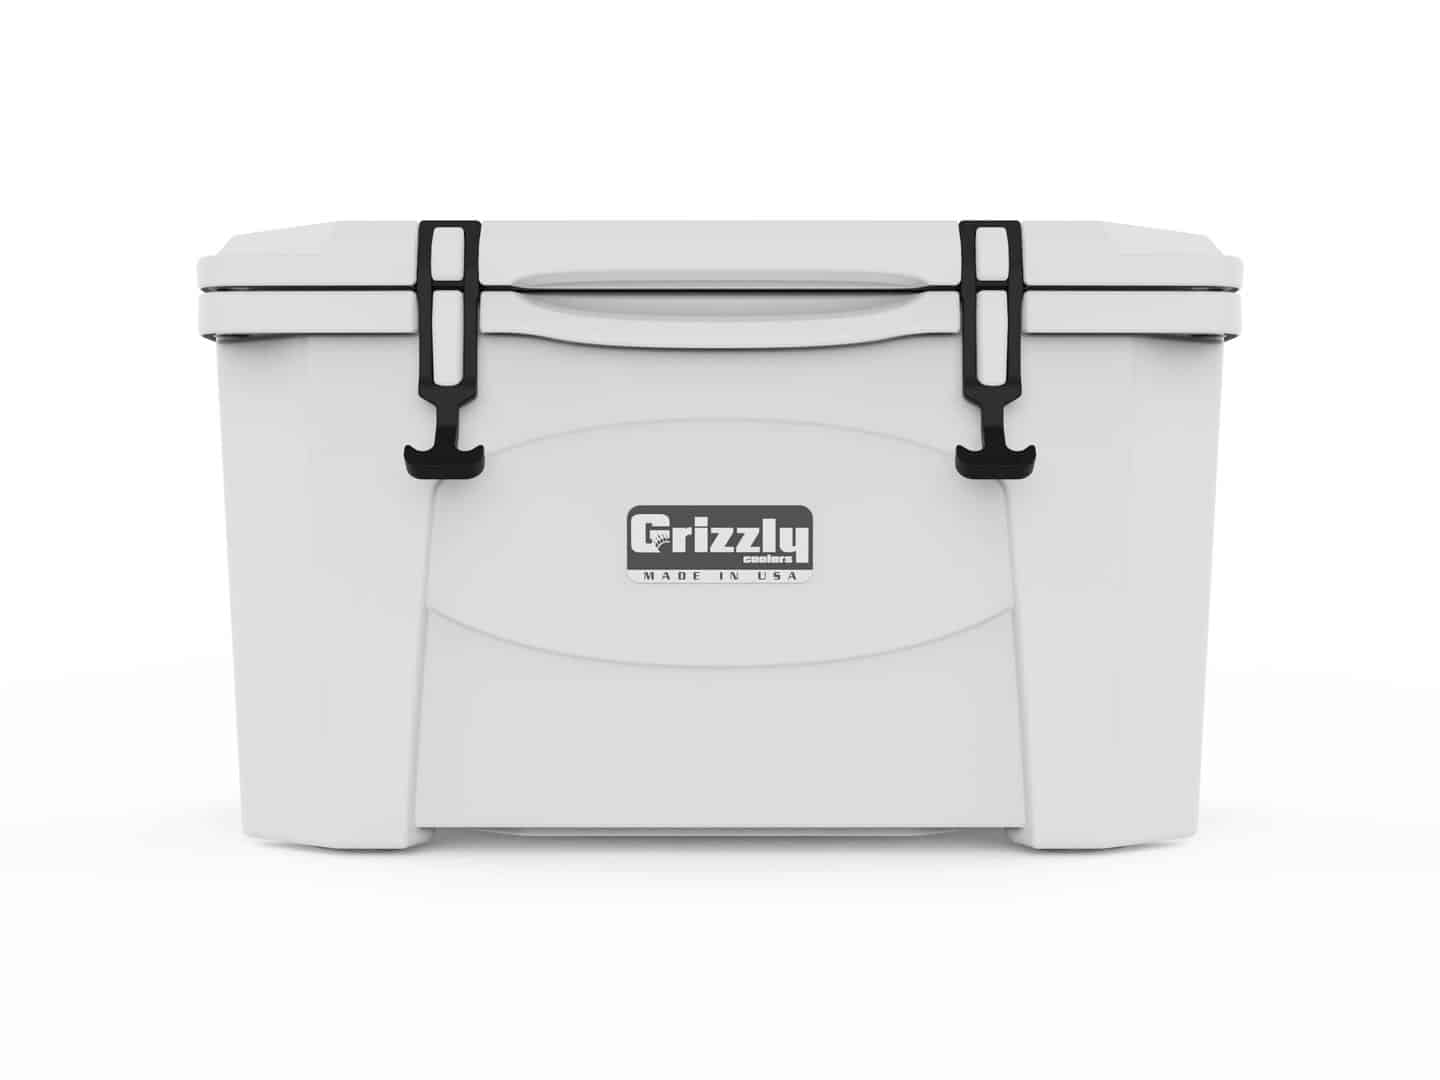 Golfdom on X: OK let's start off w/ our grand prize for the #PGAChamp  —this Grizzly cooler (40 qt, $400 retail) courtesy of @JohnDeere! To win:  tell us 1) who wins and